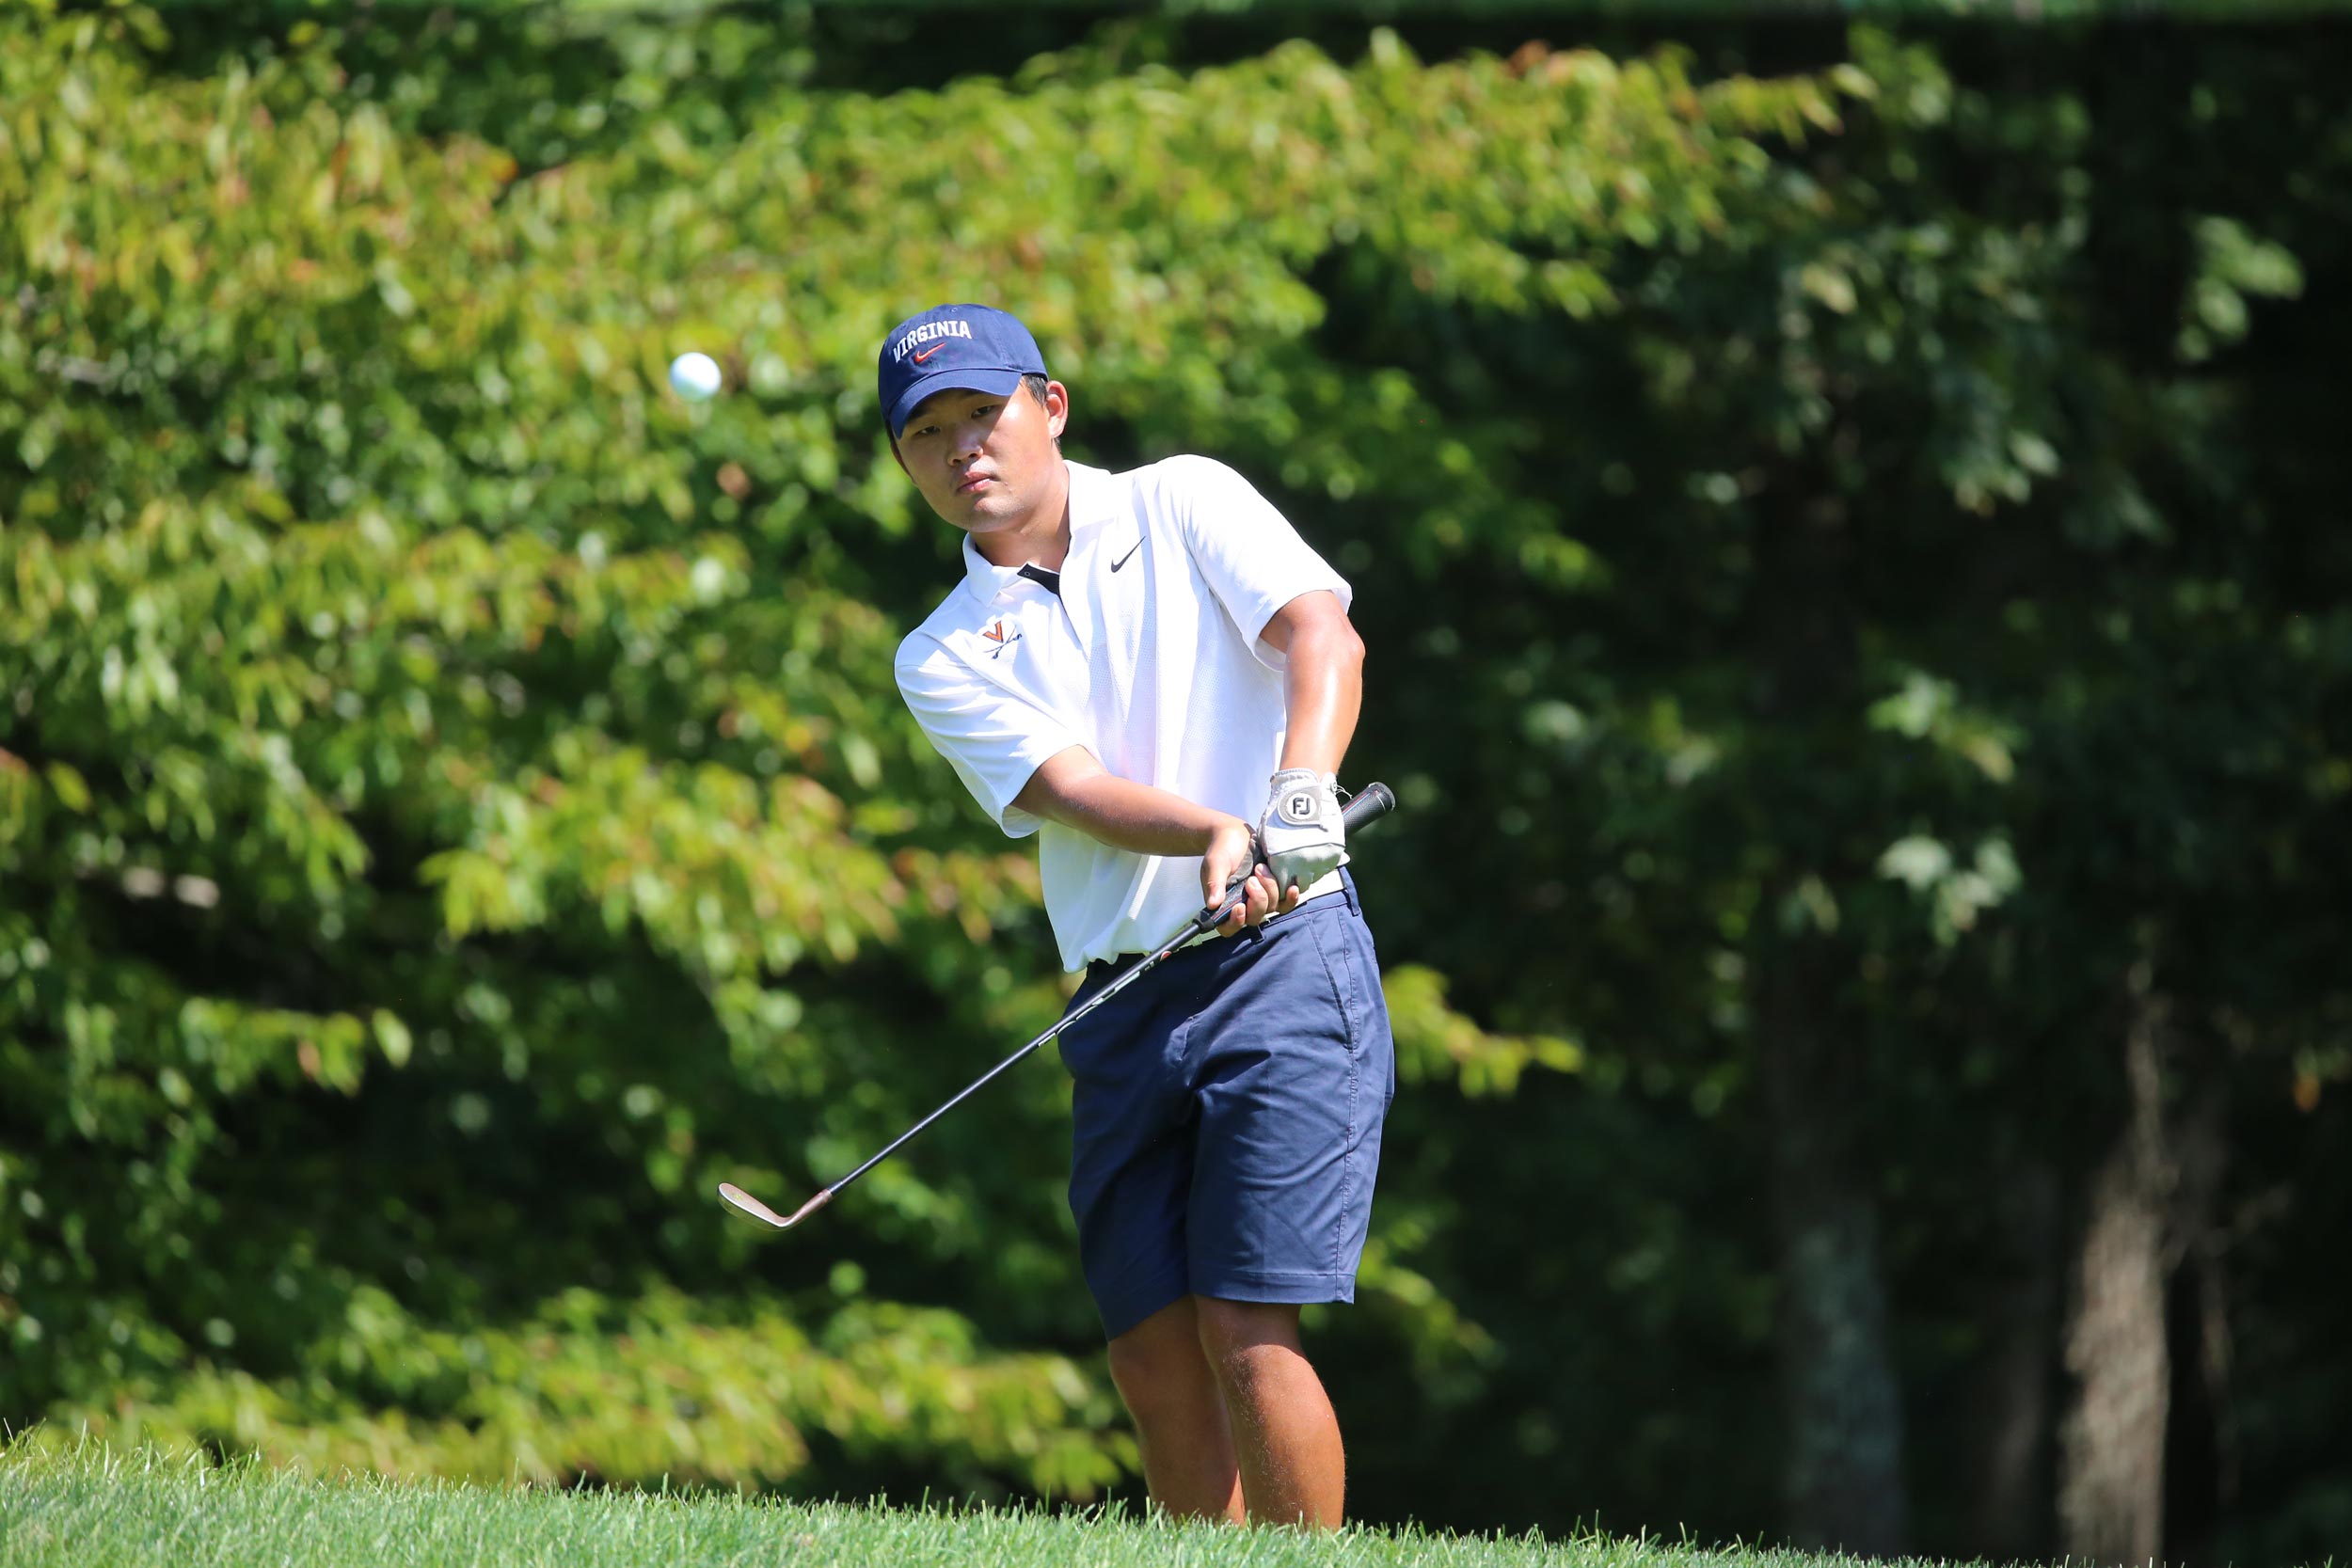 Paul Chang on the golf course right after making contact with the ball